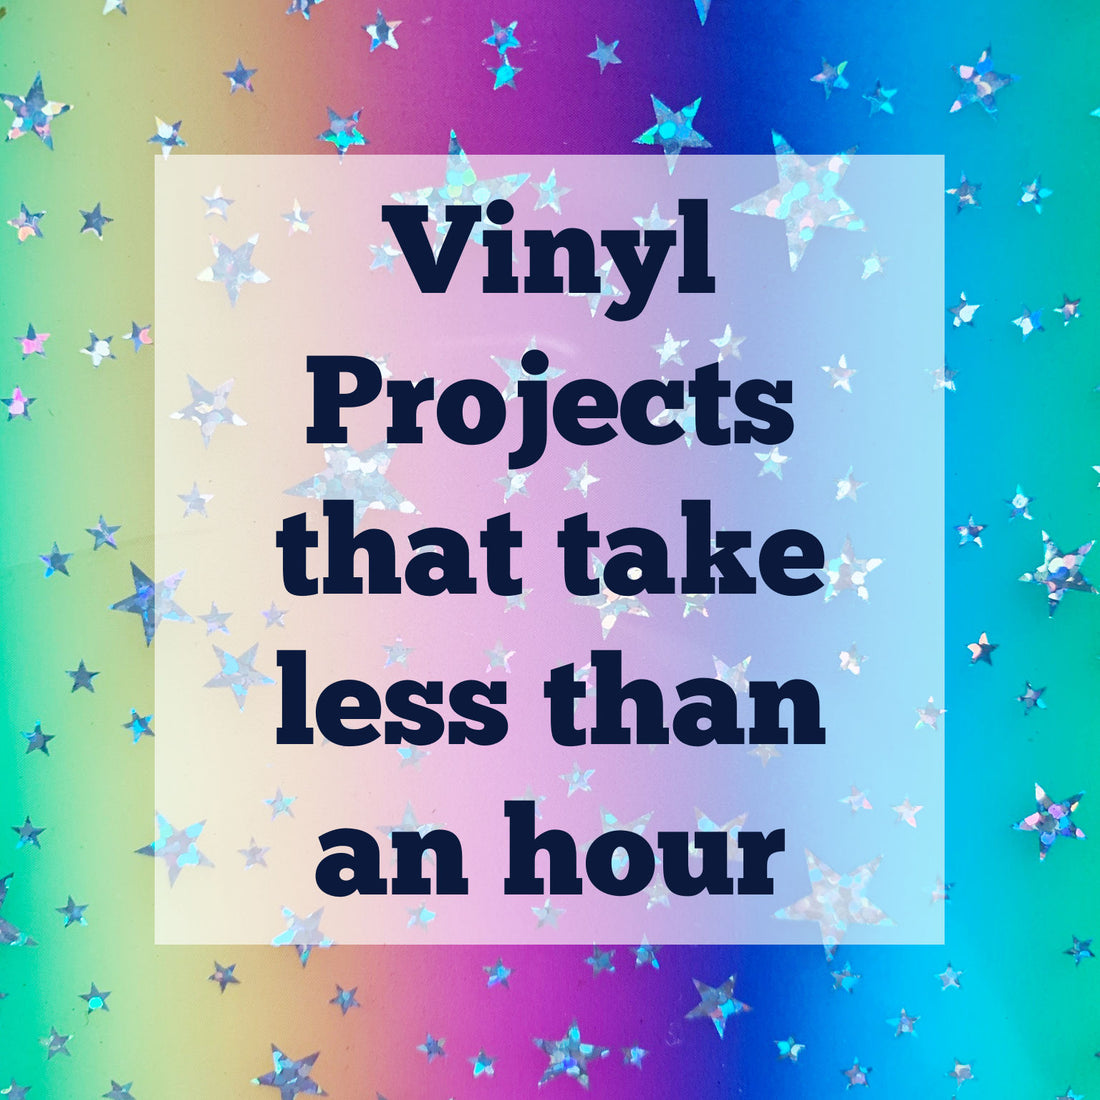 Vinyl Projects that take less than an hour